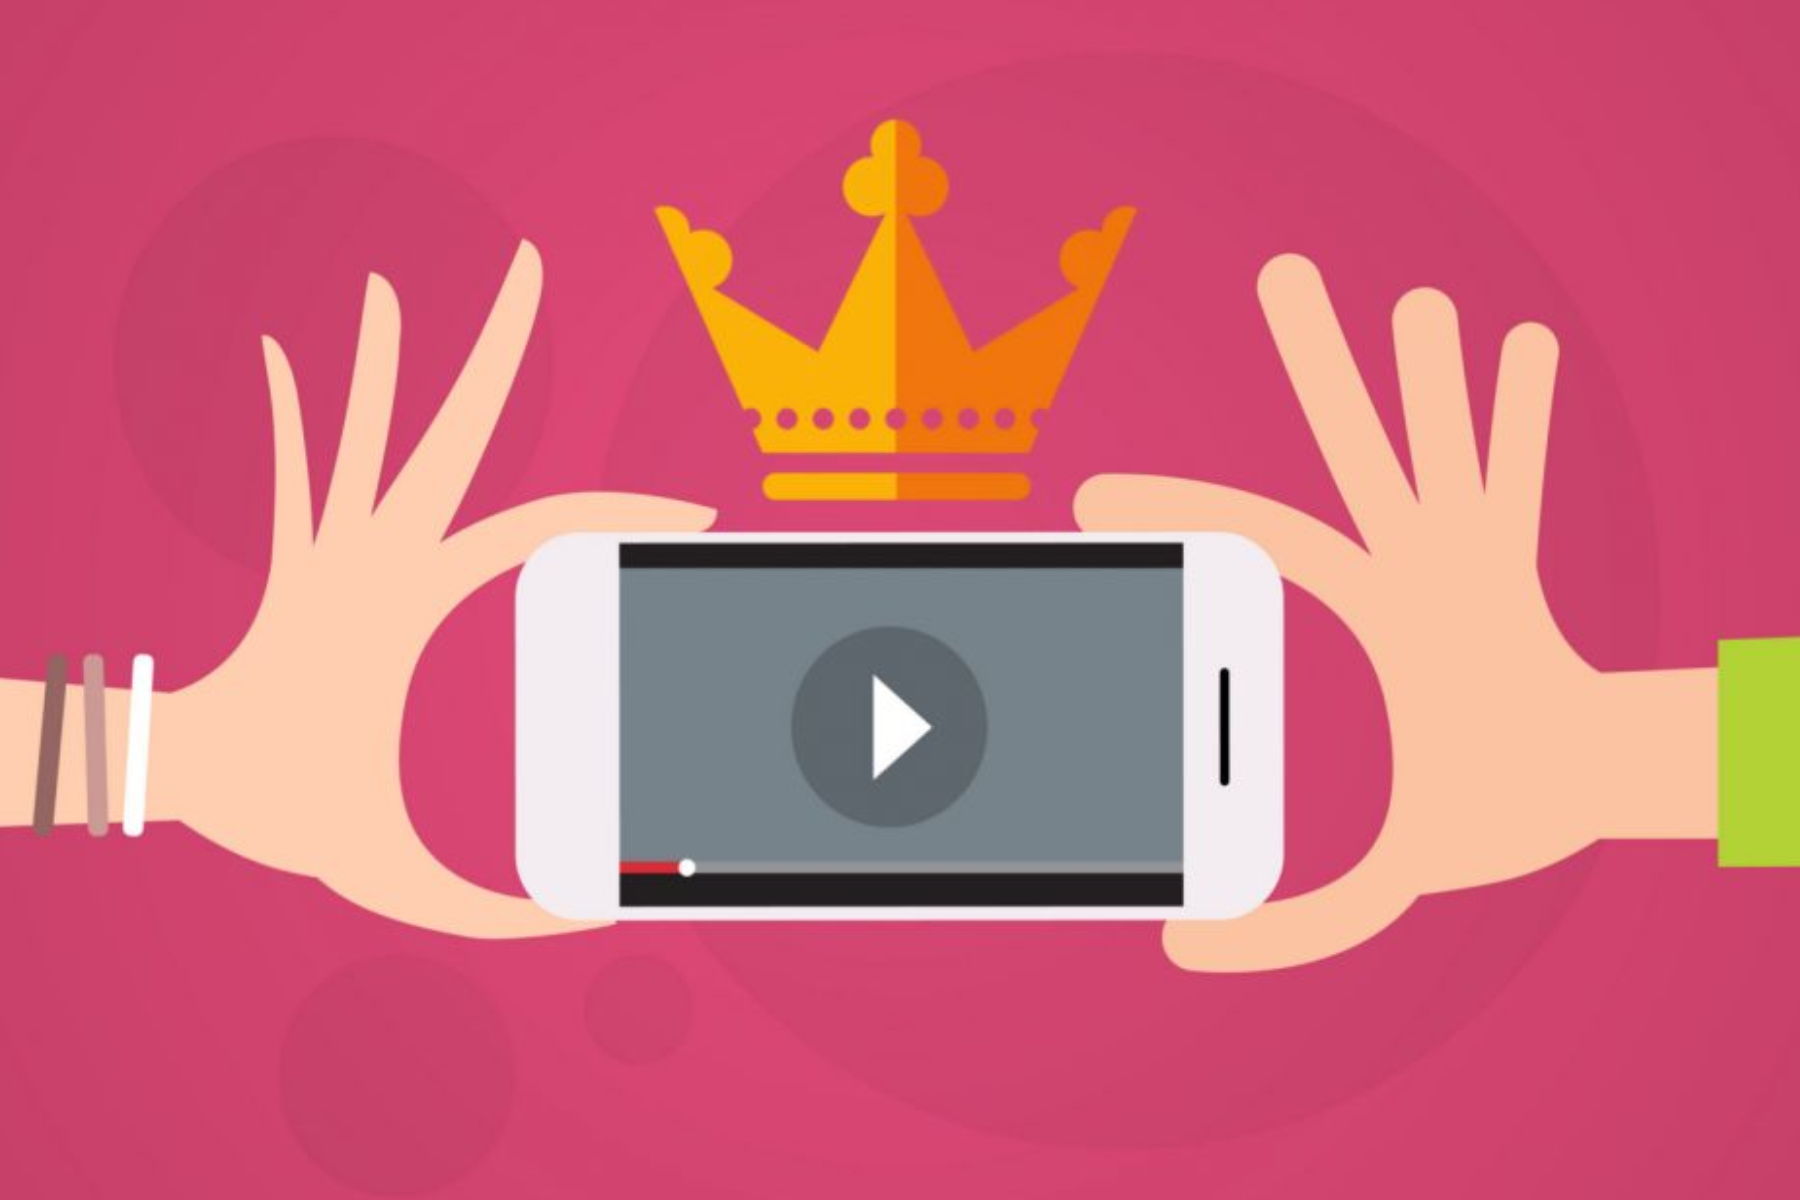 Different hands are holding the phone, which has a video paused on the screen and a crown on top of it